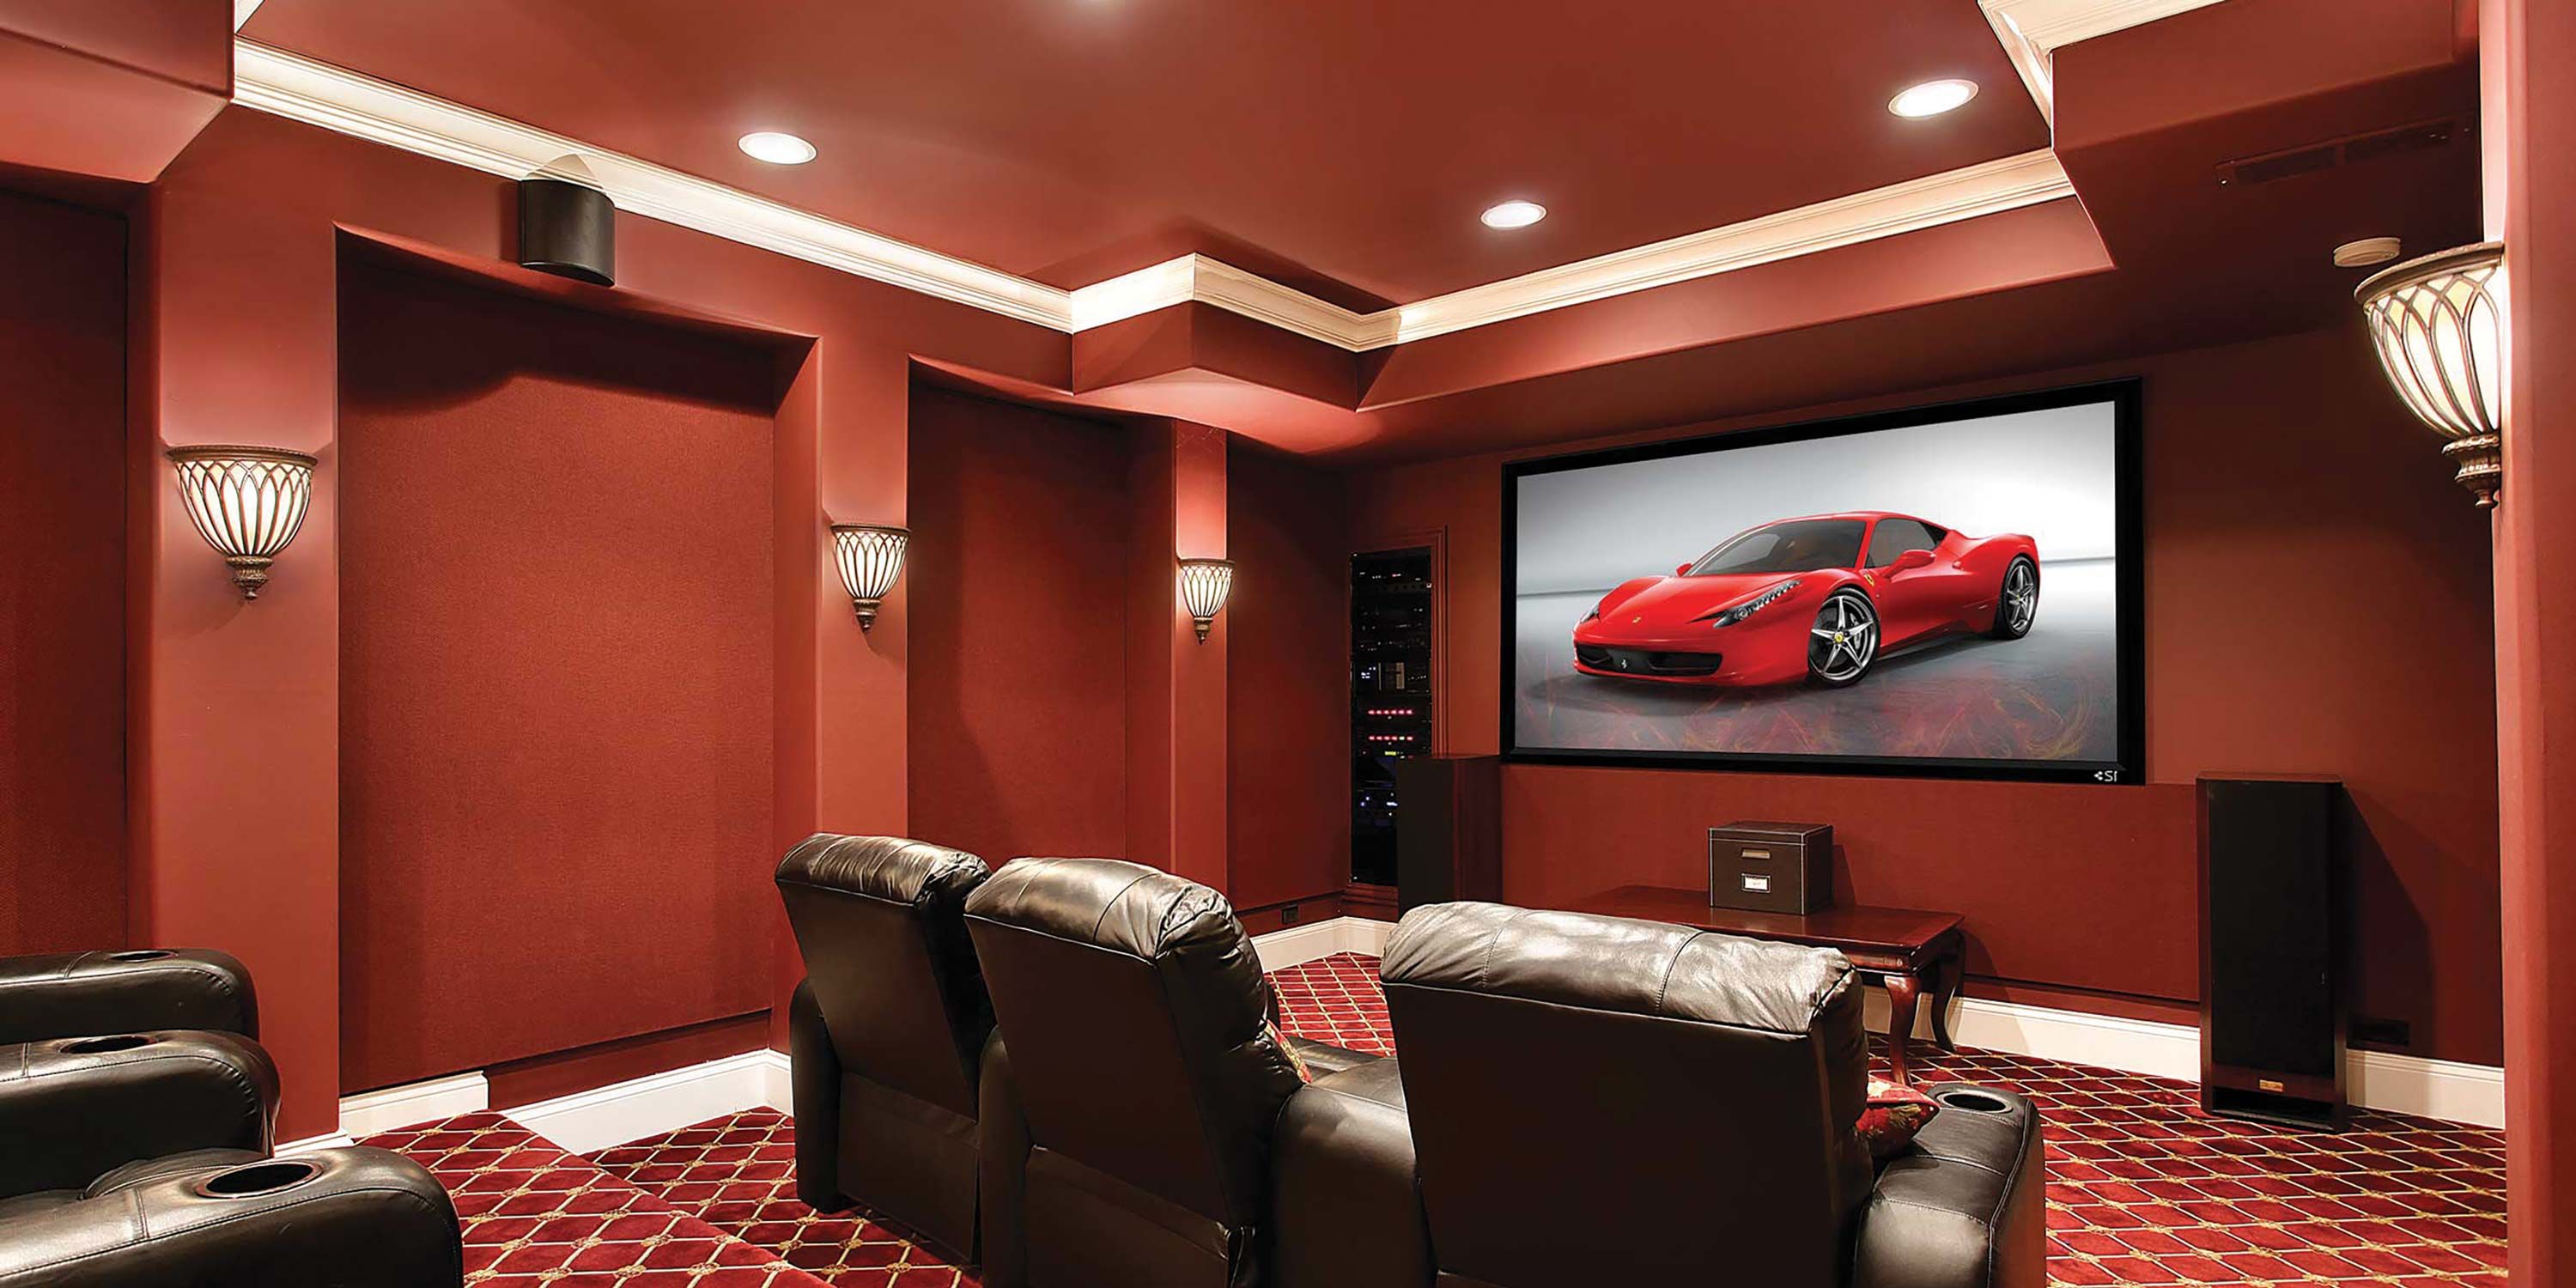 condo theather, red walls, car on screen